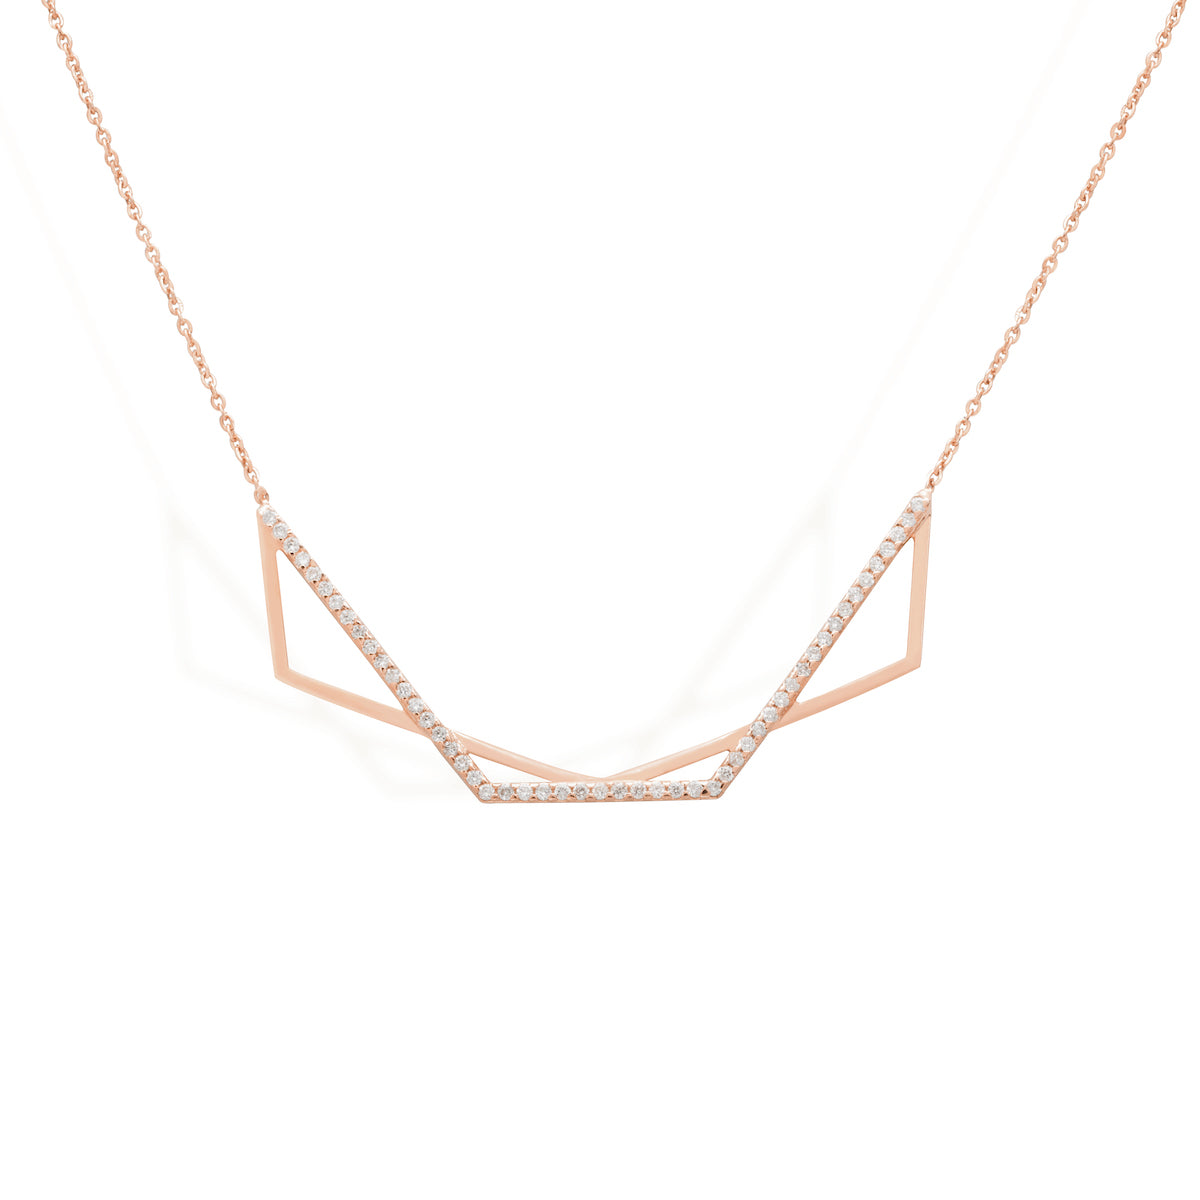 diamond necklace for women in rose gold colour